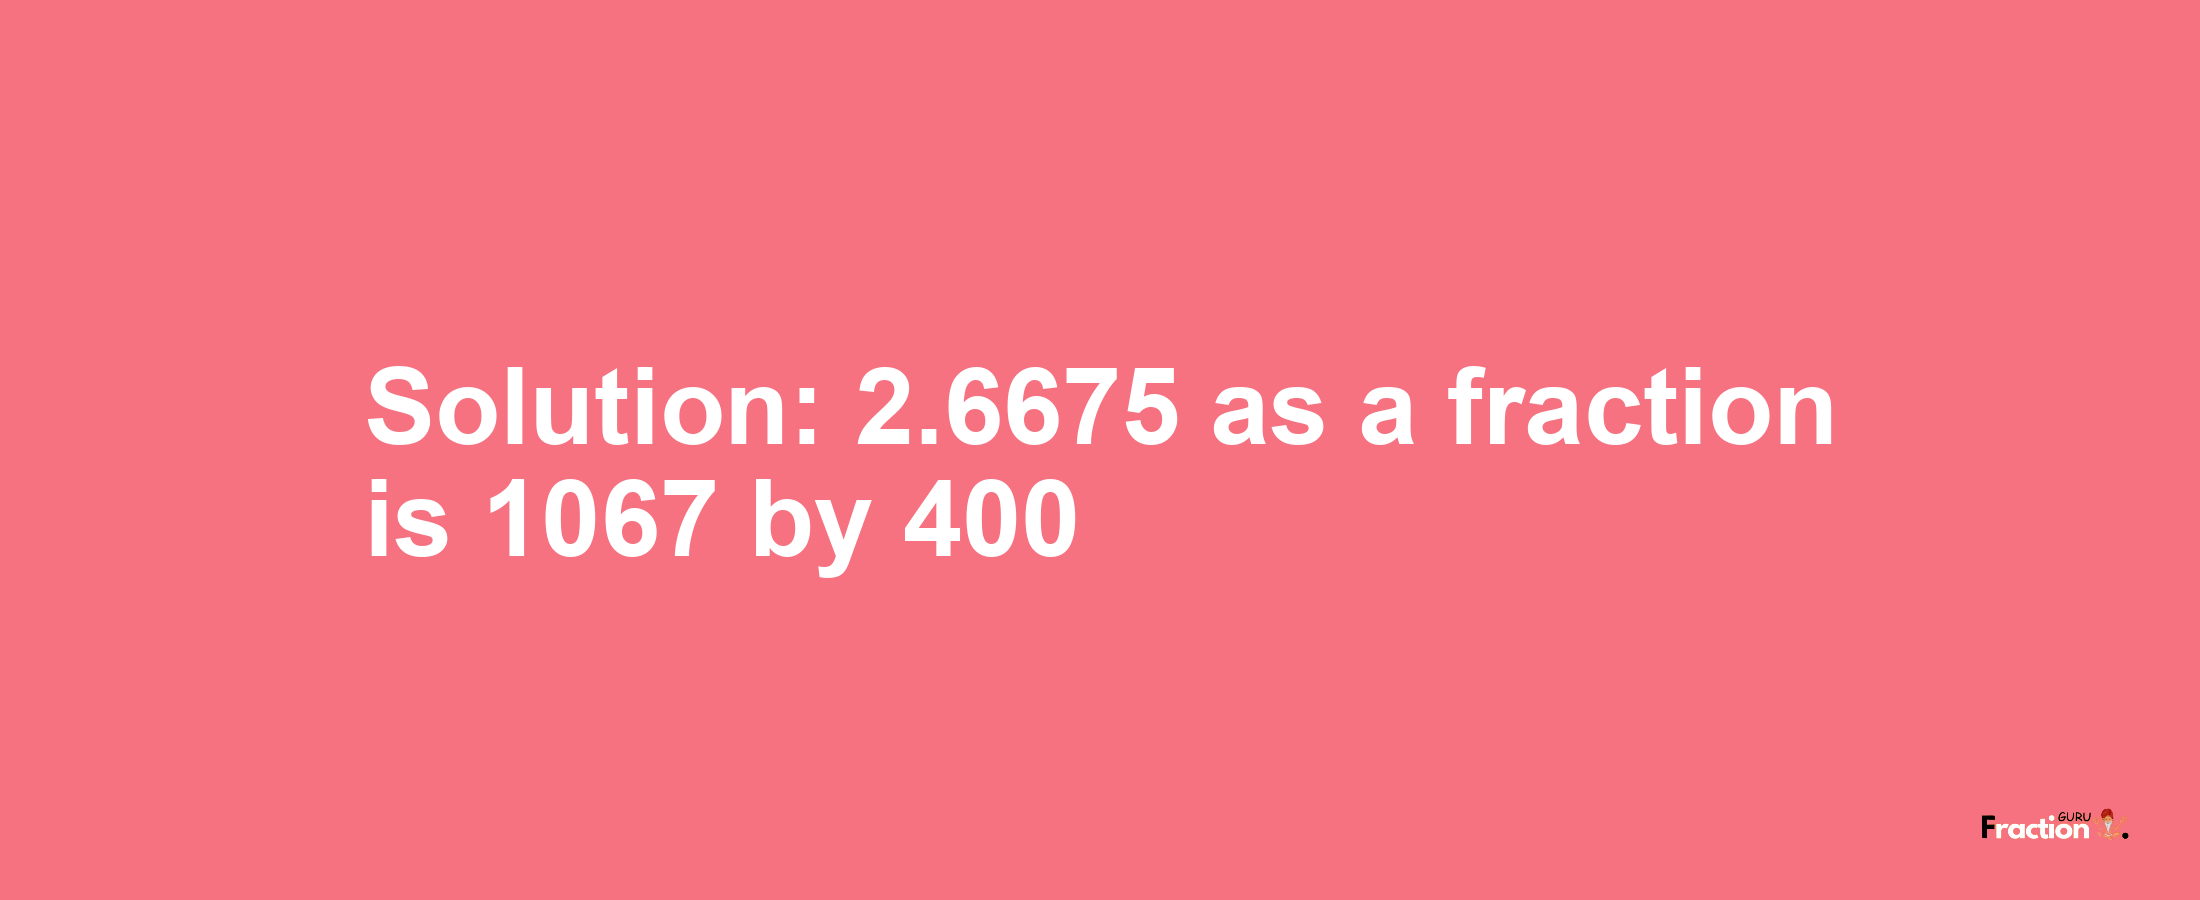 Solution:2.6675 as a fraction is 1067/400